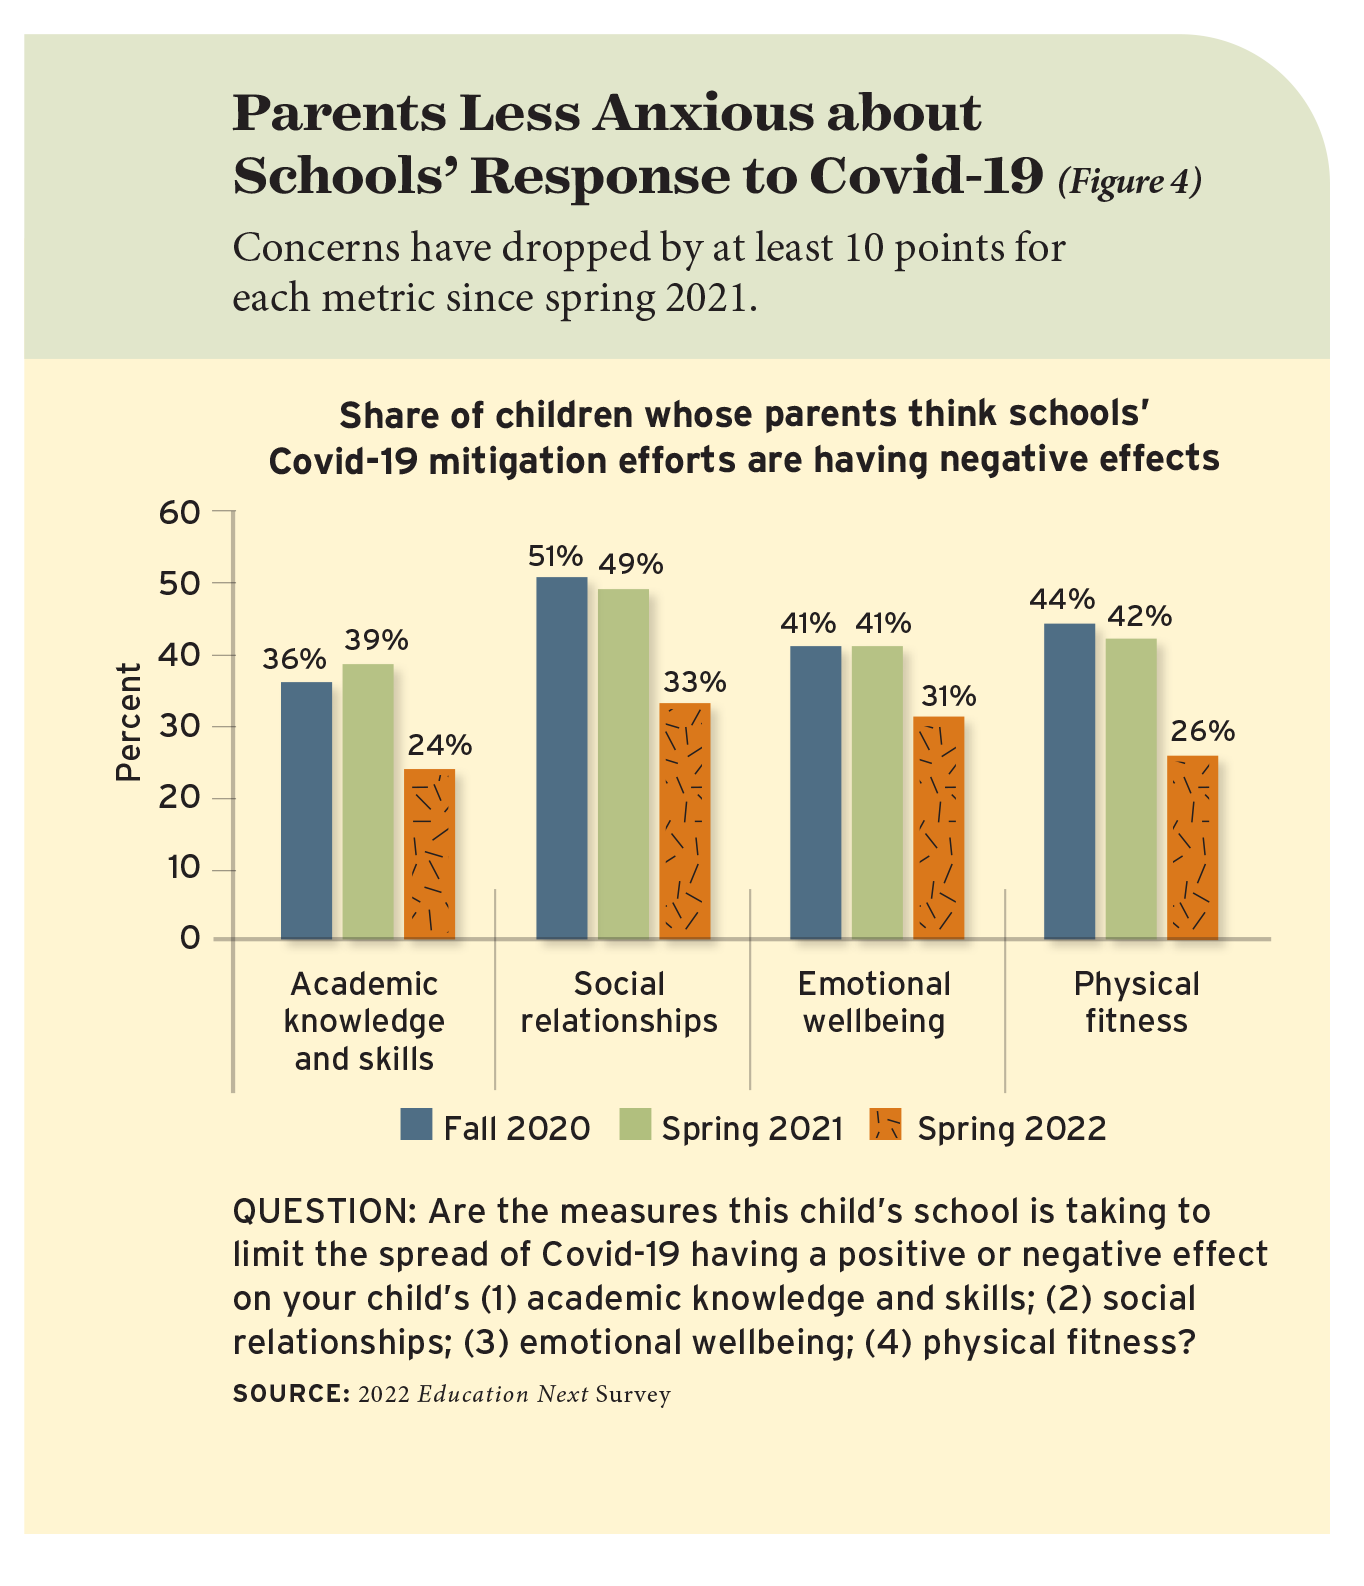 Parents Less Anxious about Schools’ Response to Covid-19 (Figure 4)